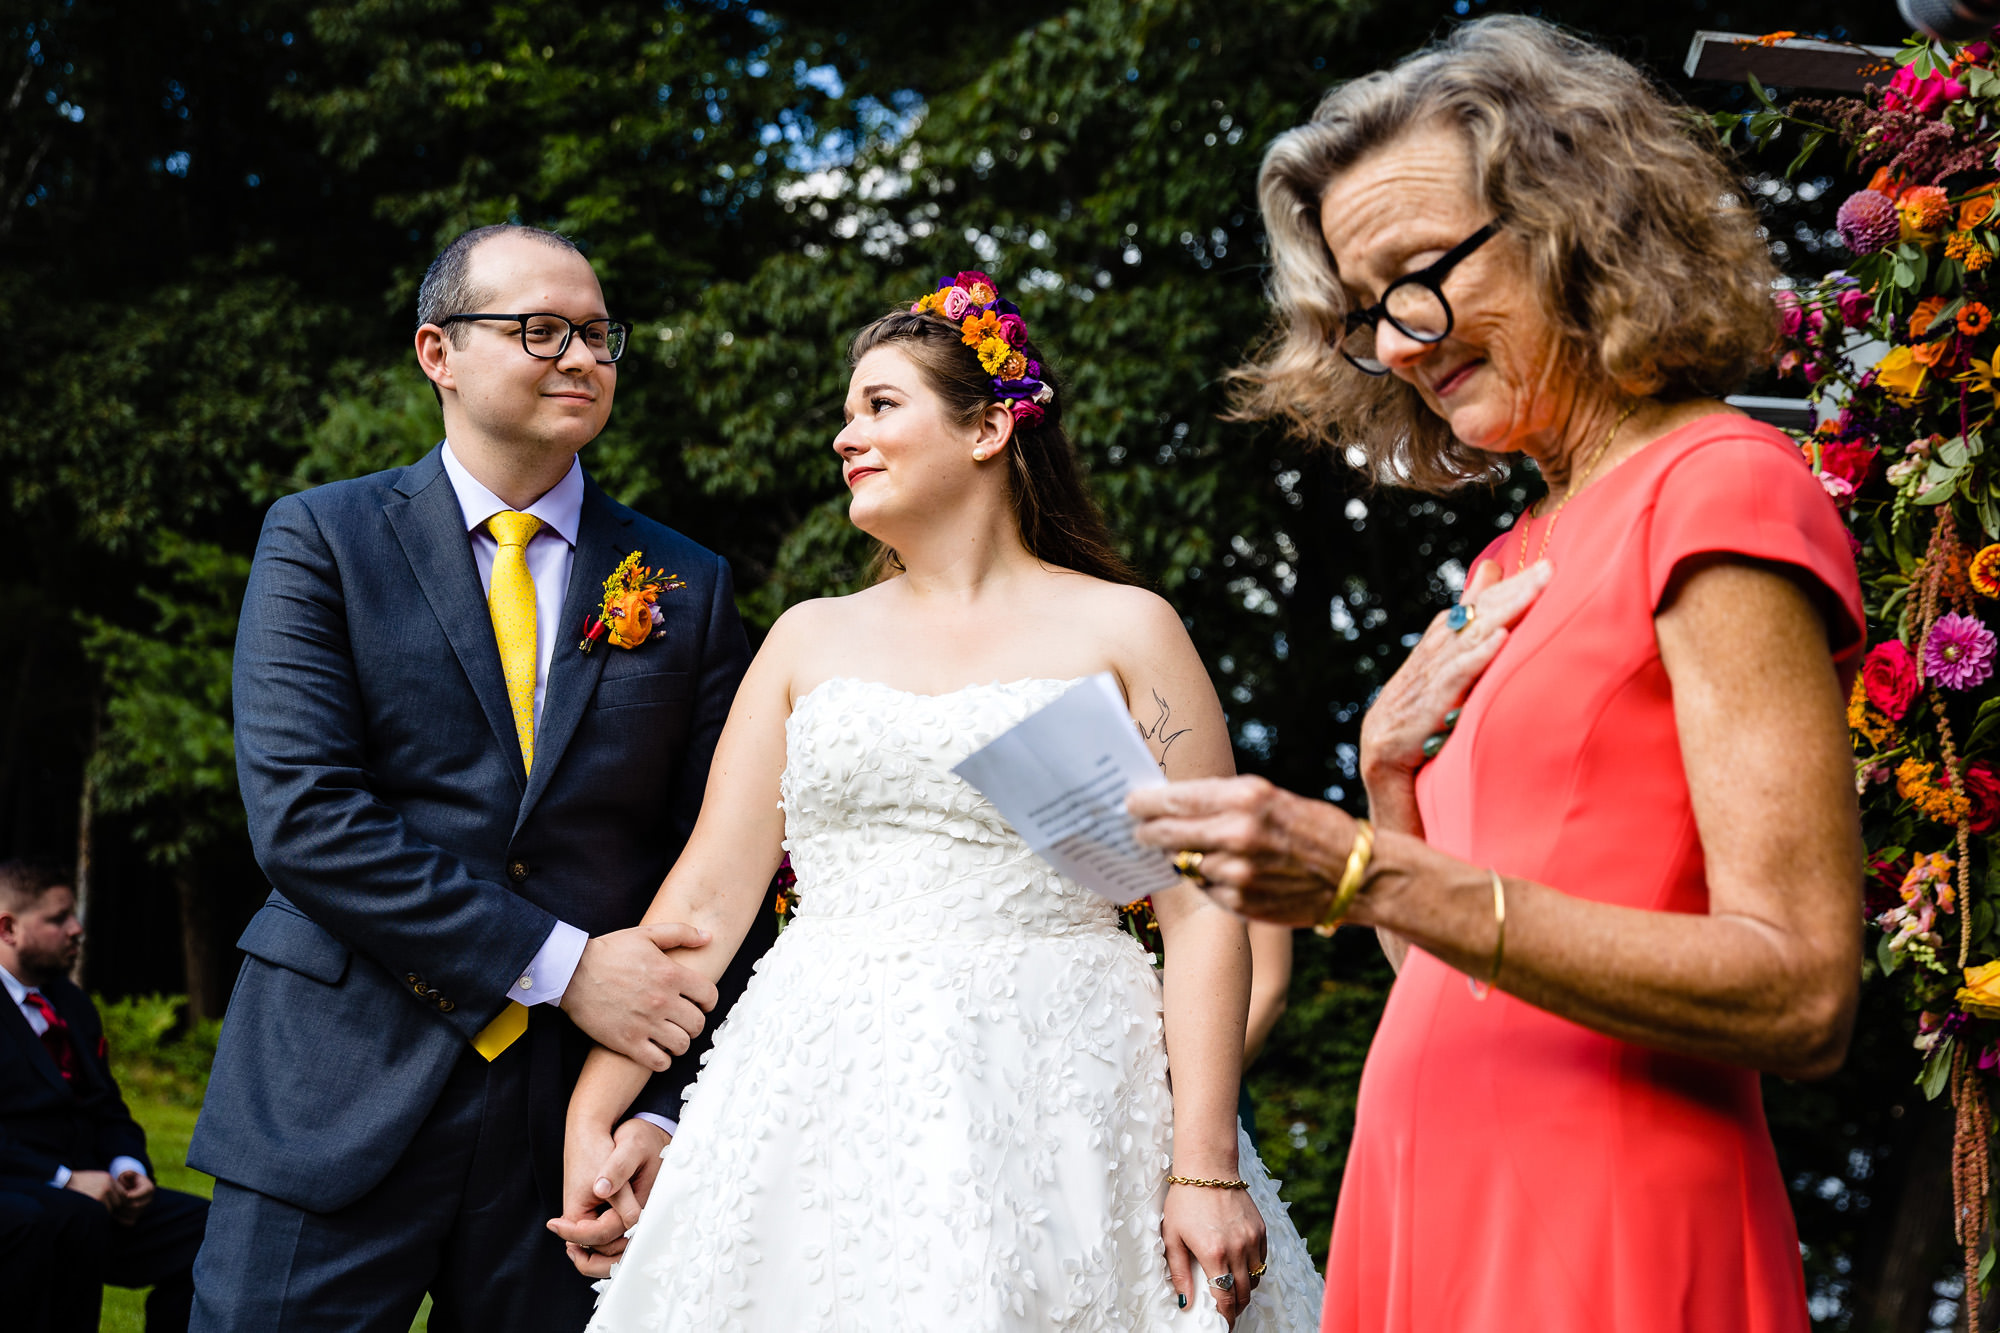 A wedding couple react emotionally while the mother of the bride does a reading at the wedding ceremony.